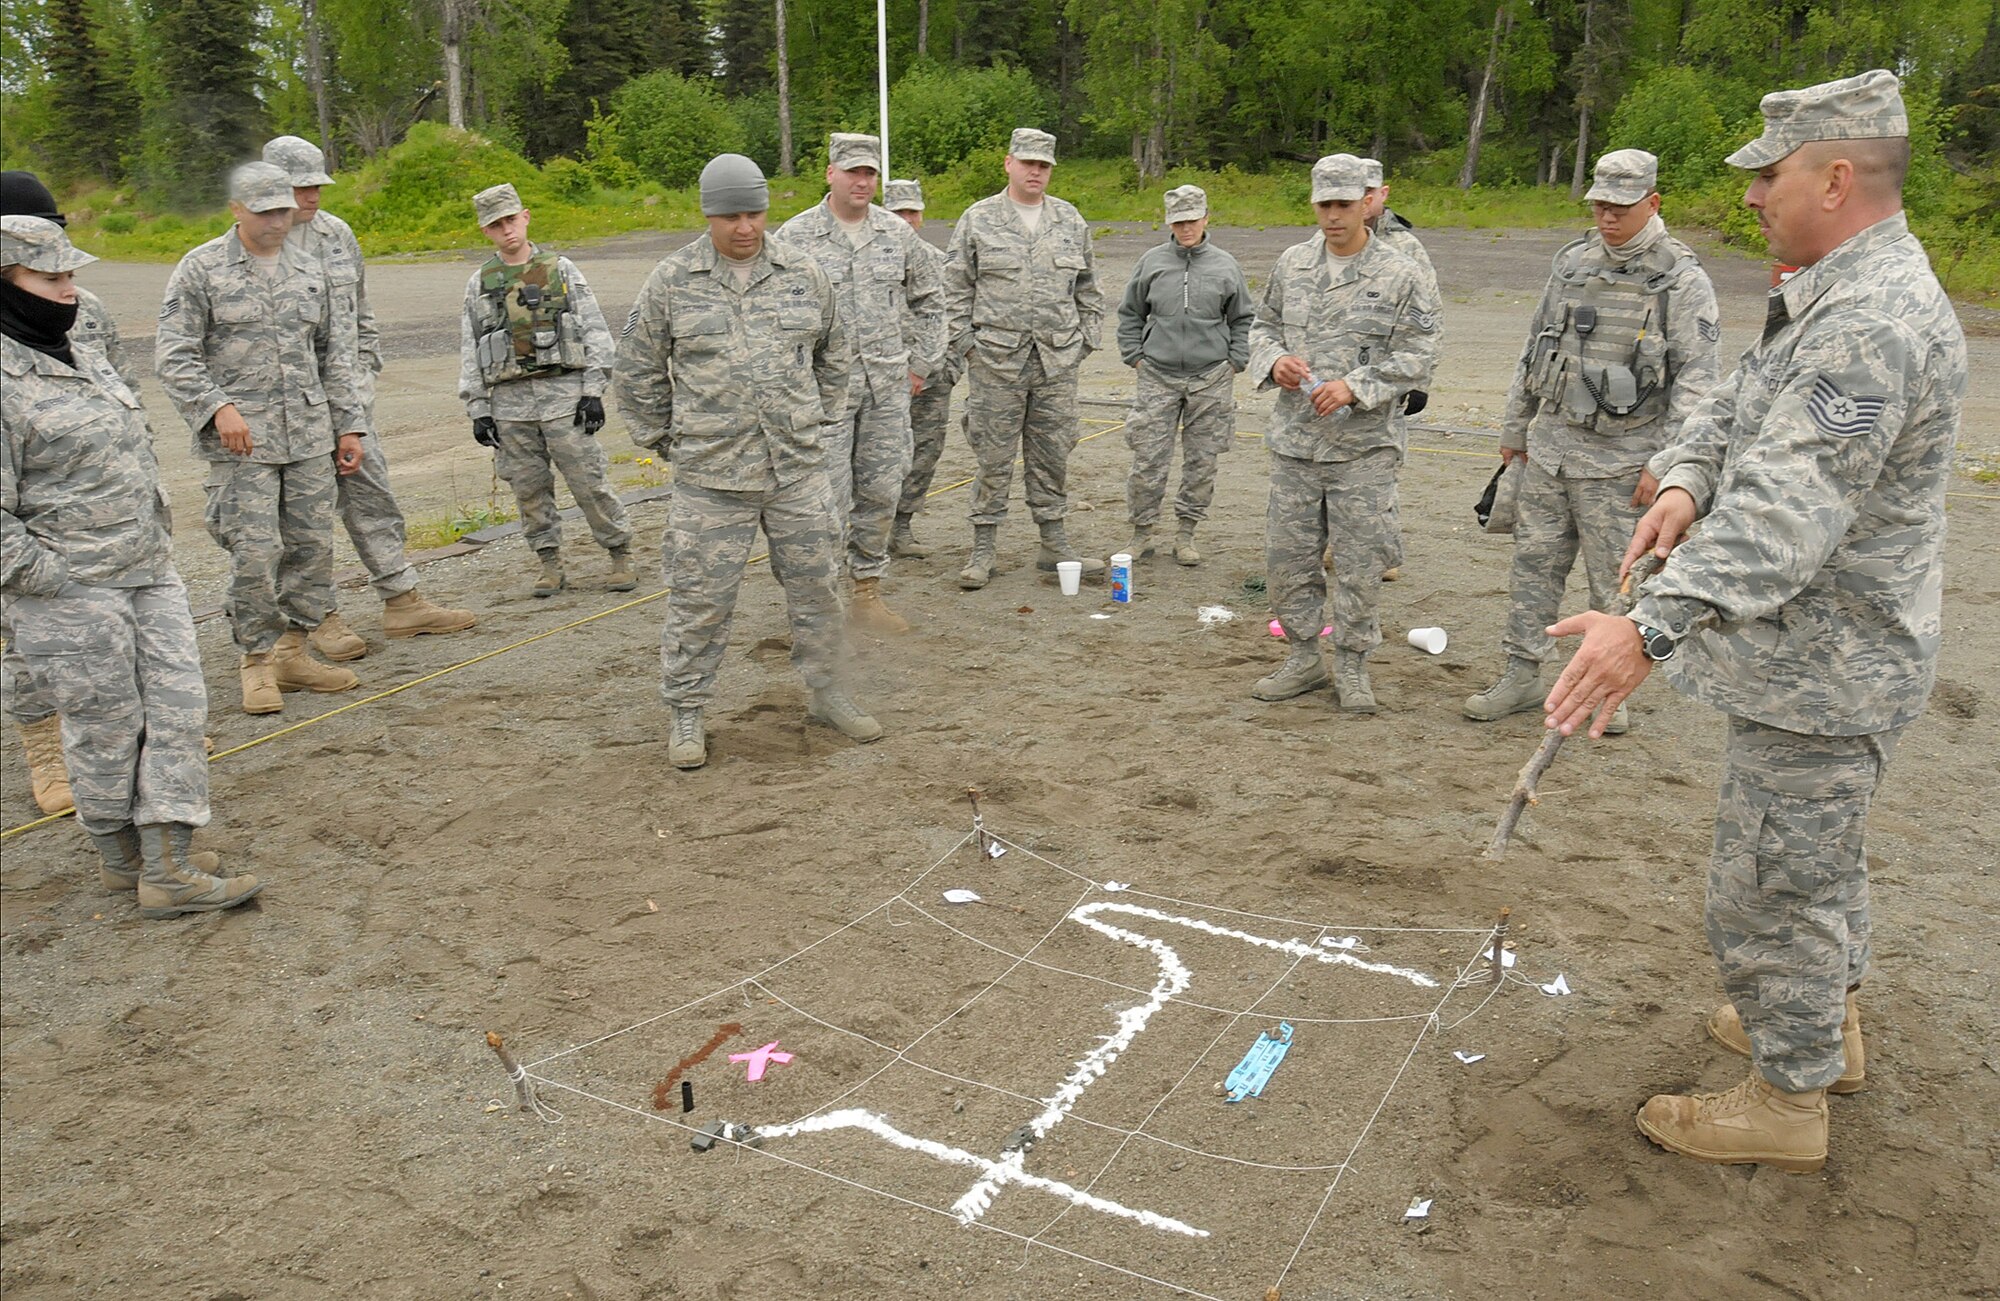 Tech. Sgt. Marco De La Cruz, a member of the 146th Security Force Squadron, 146th Airlift Wing, Channel Islands Air National Guard Station, Calif. uses a sand table, a three-dimensional version of a grid map, to illustrate how maps are a vital aid when traversing rough torrain as well as obtaining intelligence on a possible target. Security Force Squadron members from the 146 AW practiced patrol tactics in the woods at Joint Base Elmendorf-Richardson, Anchorage, Alaska June 2011. (Photo by Tech. Sgt. Alex Kolb)